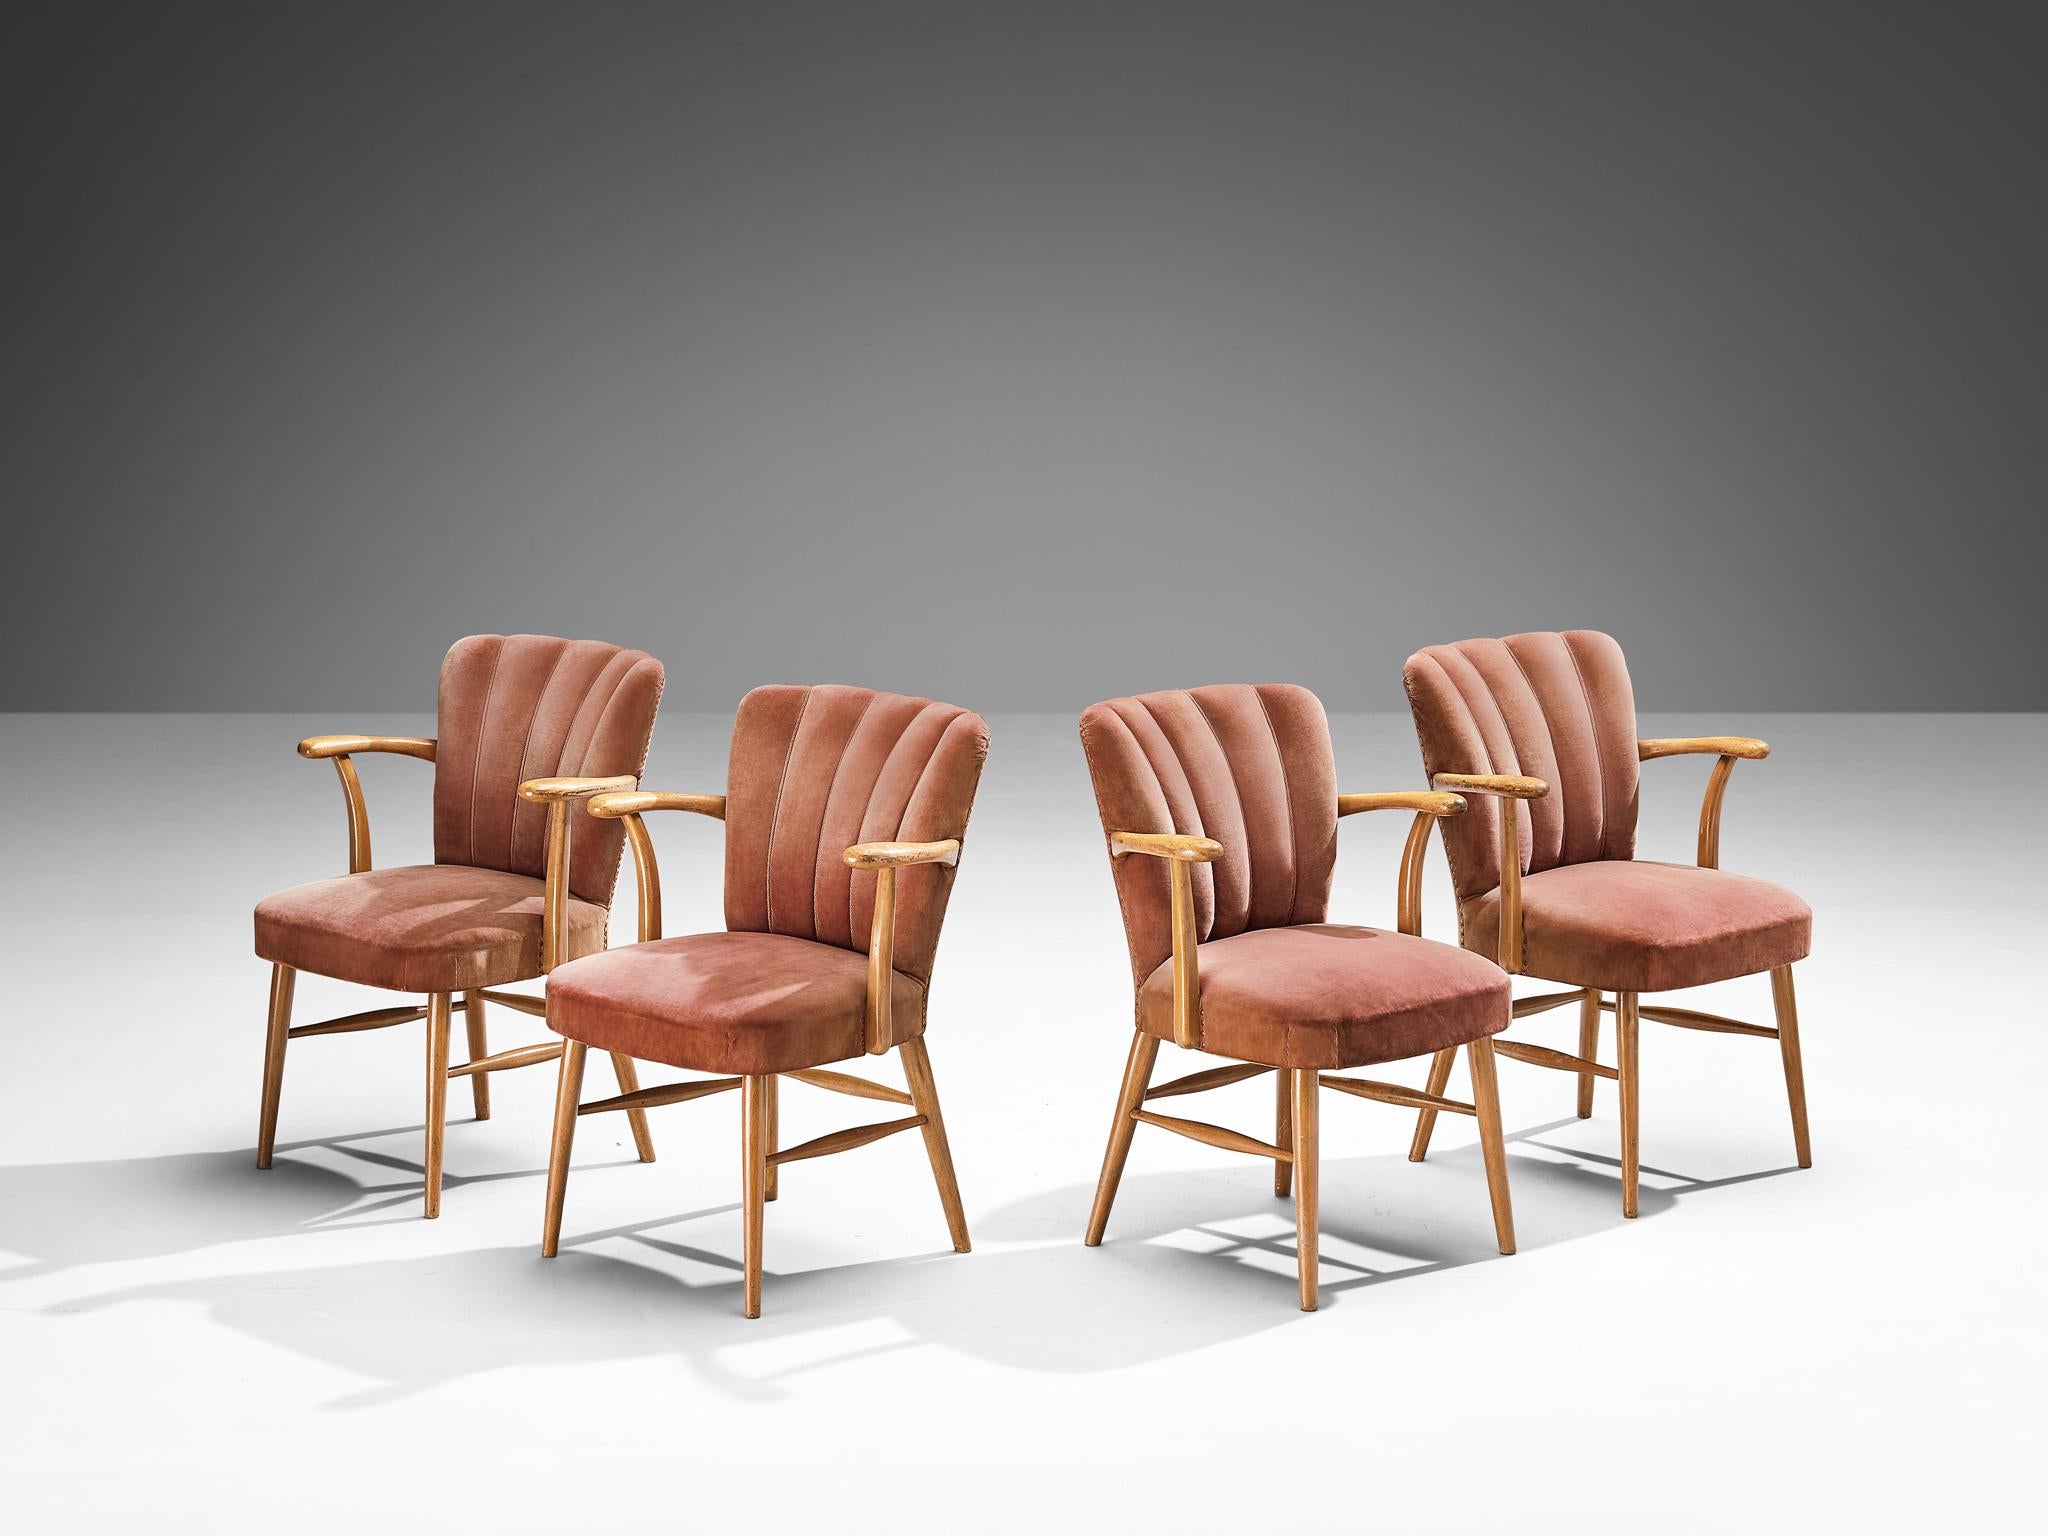 European Armchairs in Soft Pink Velvet Upholstery and Wood